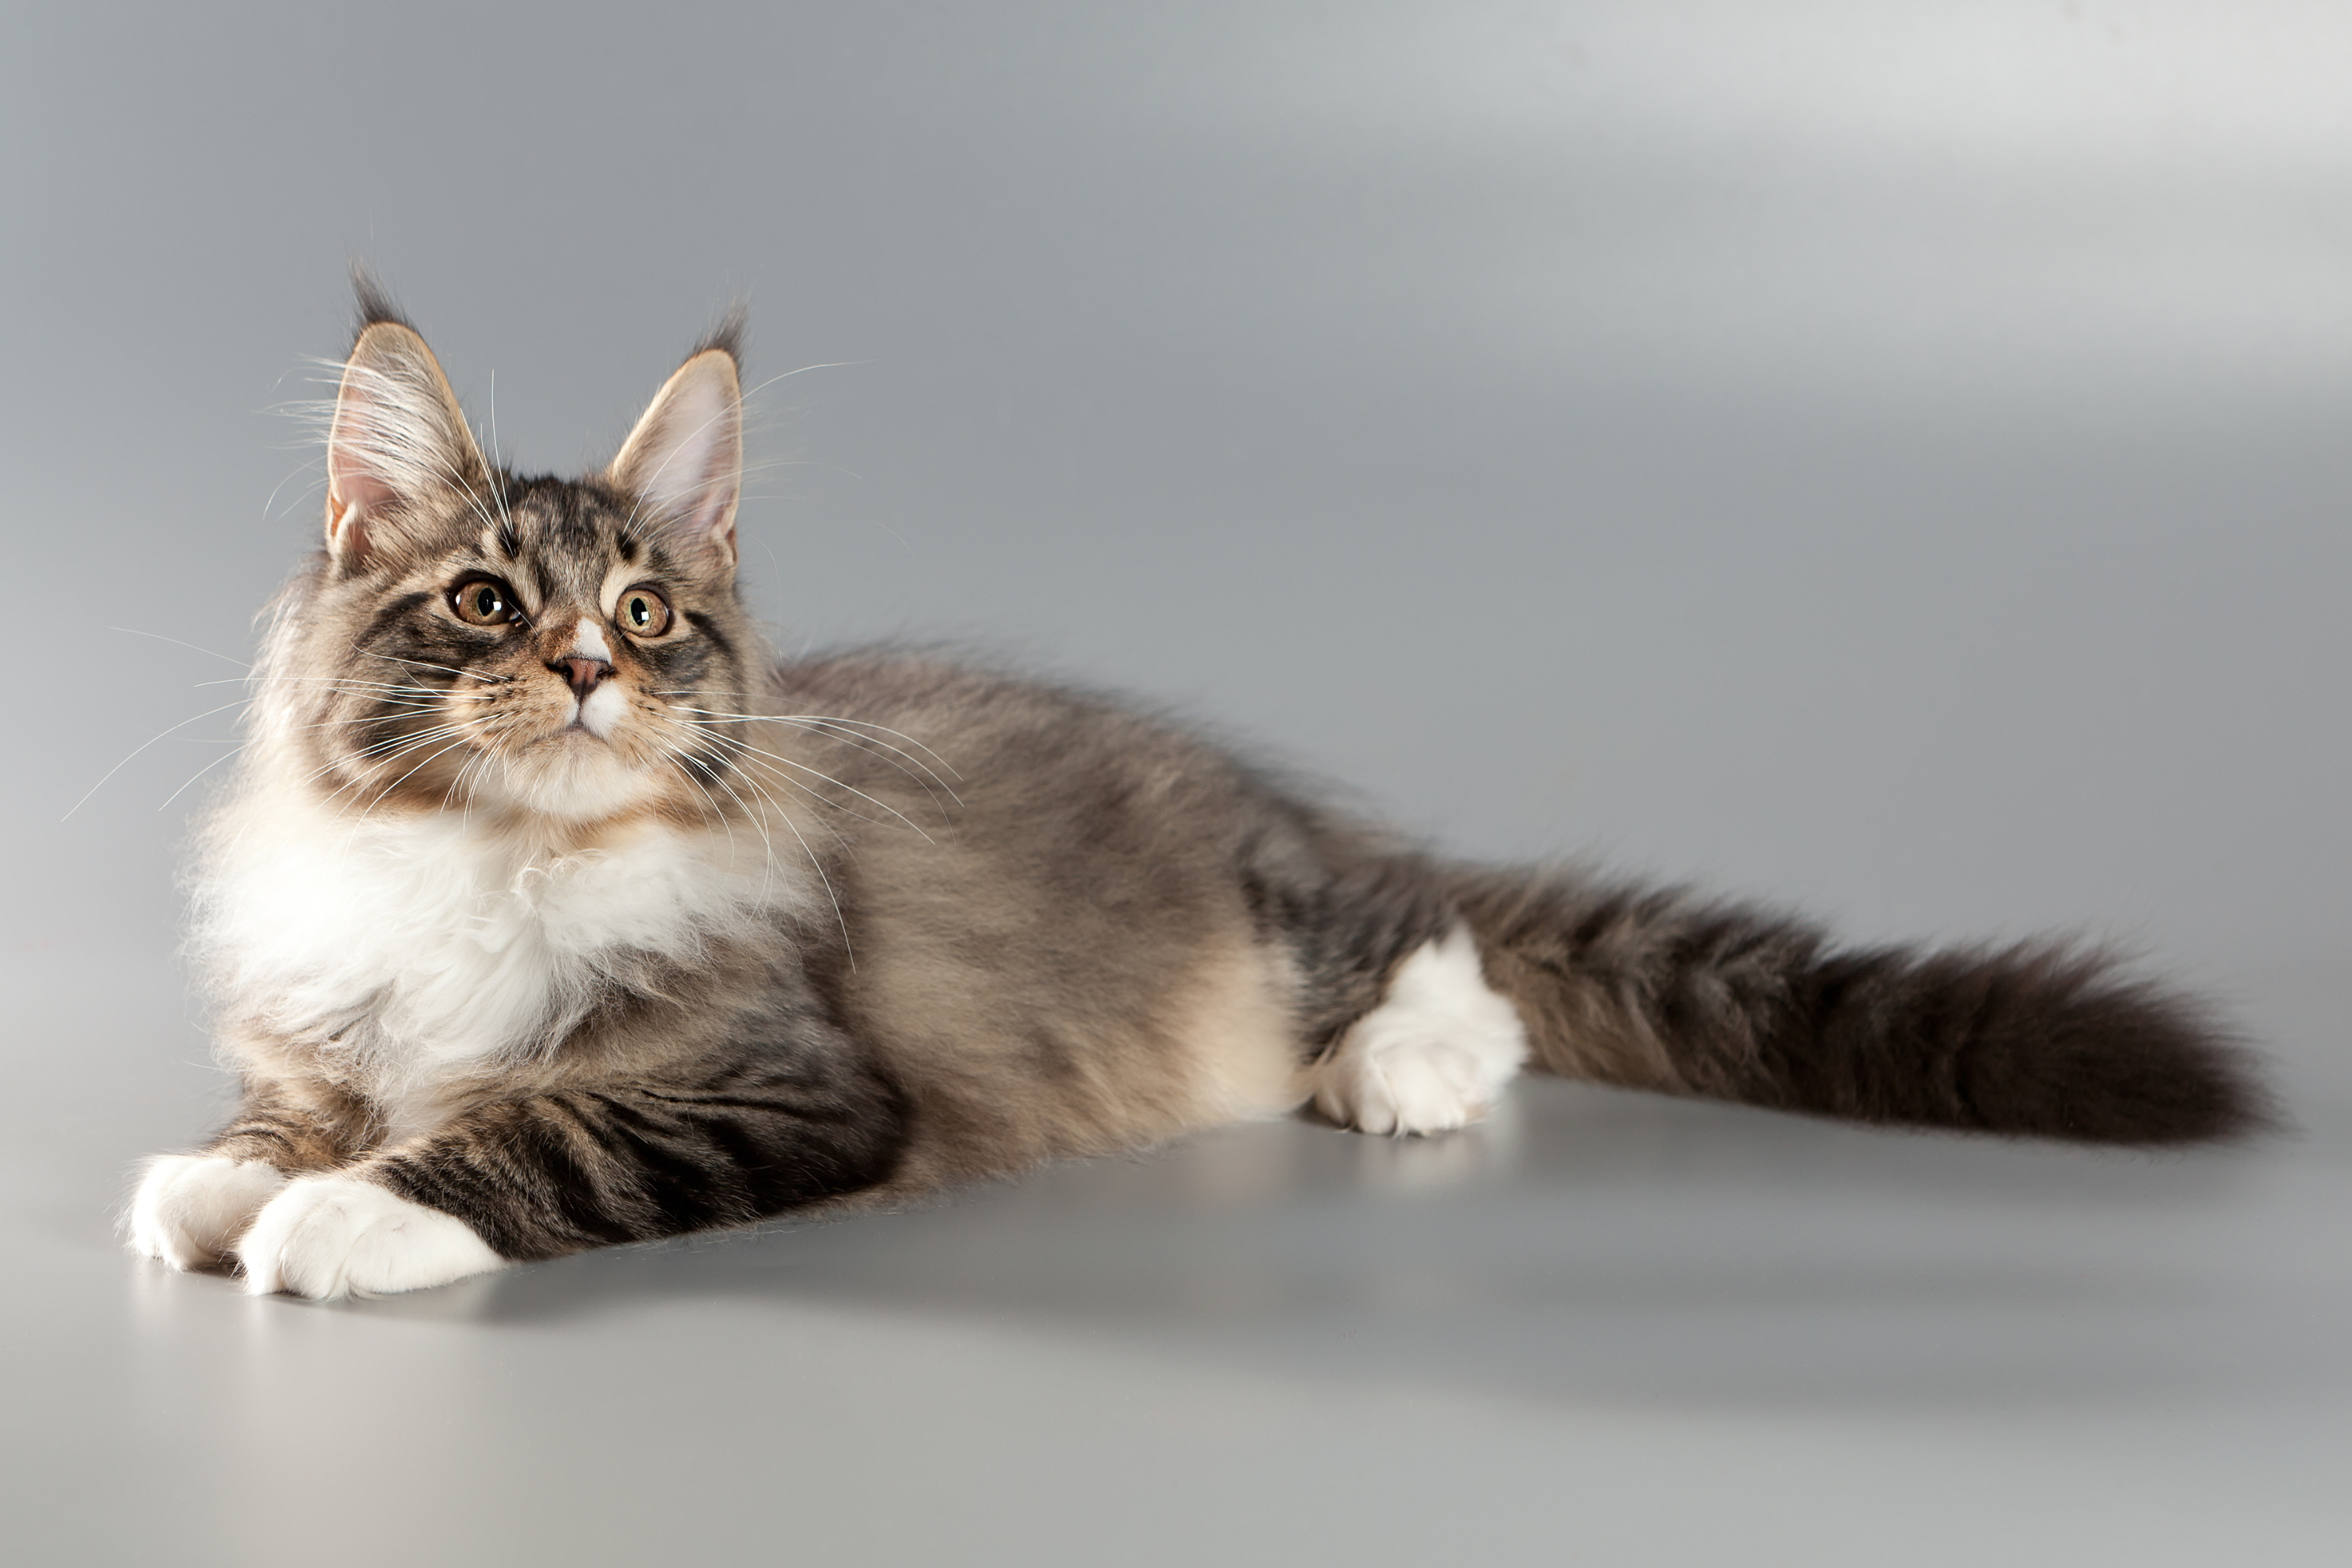 a long haired cat sitting on a gray background